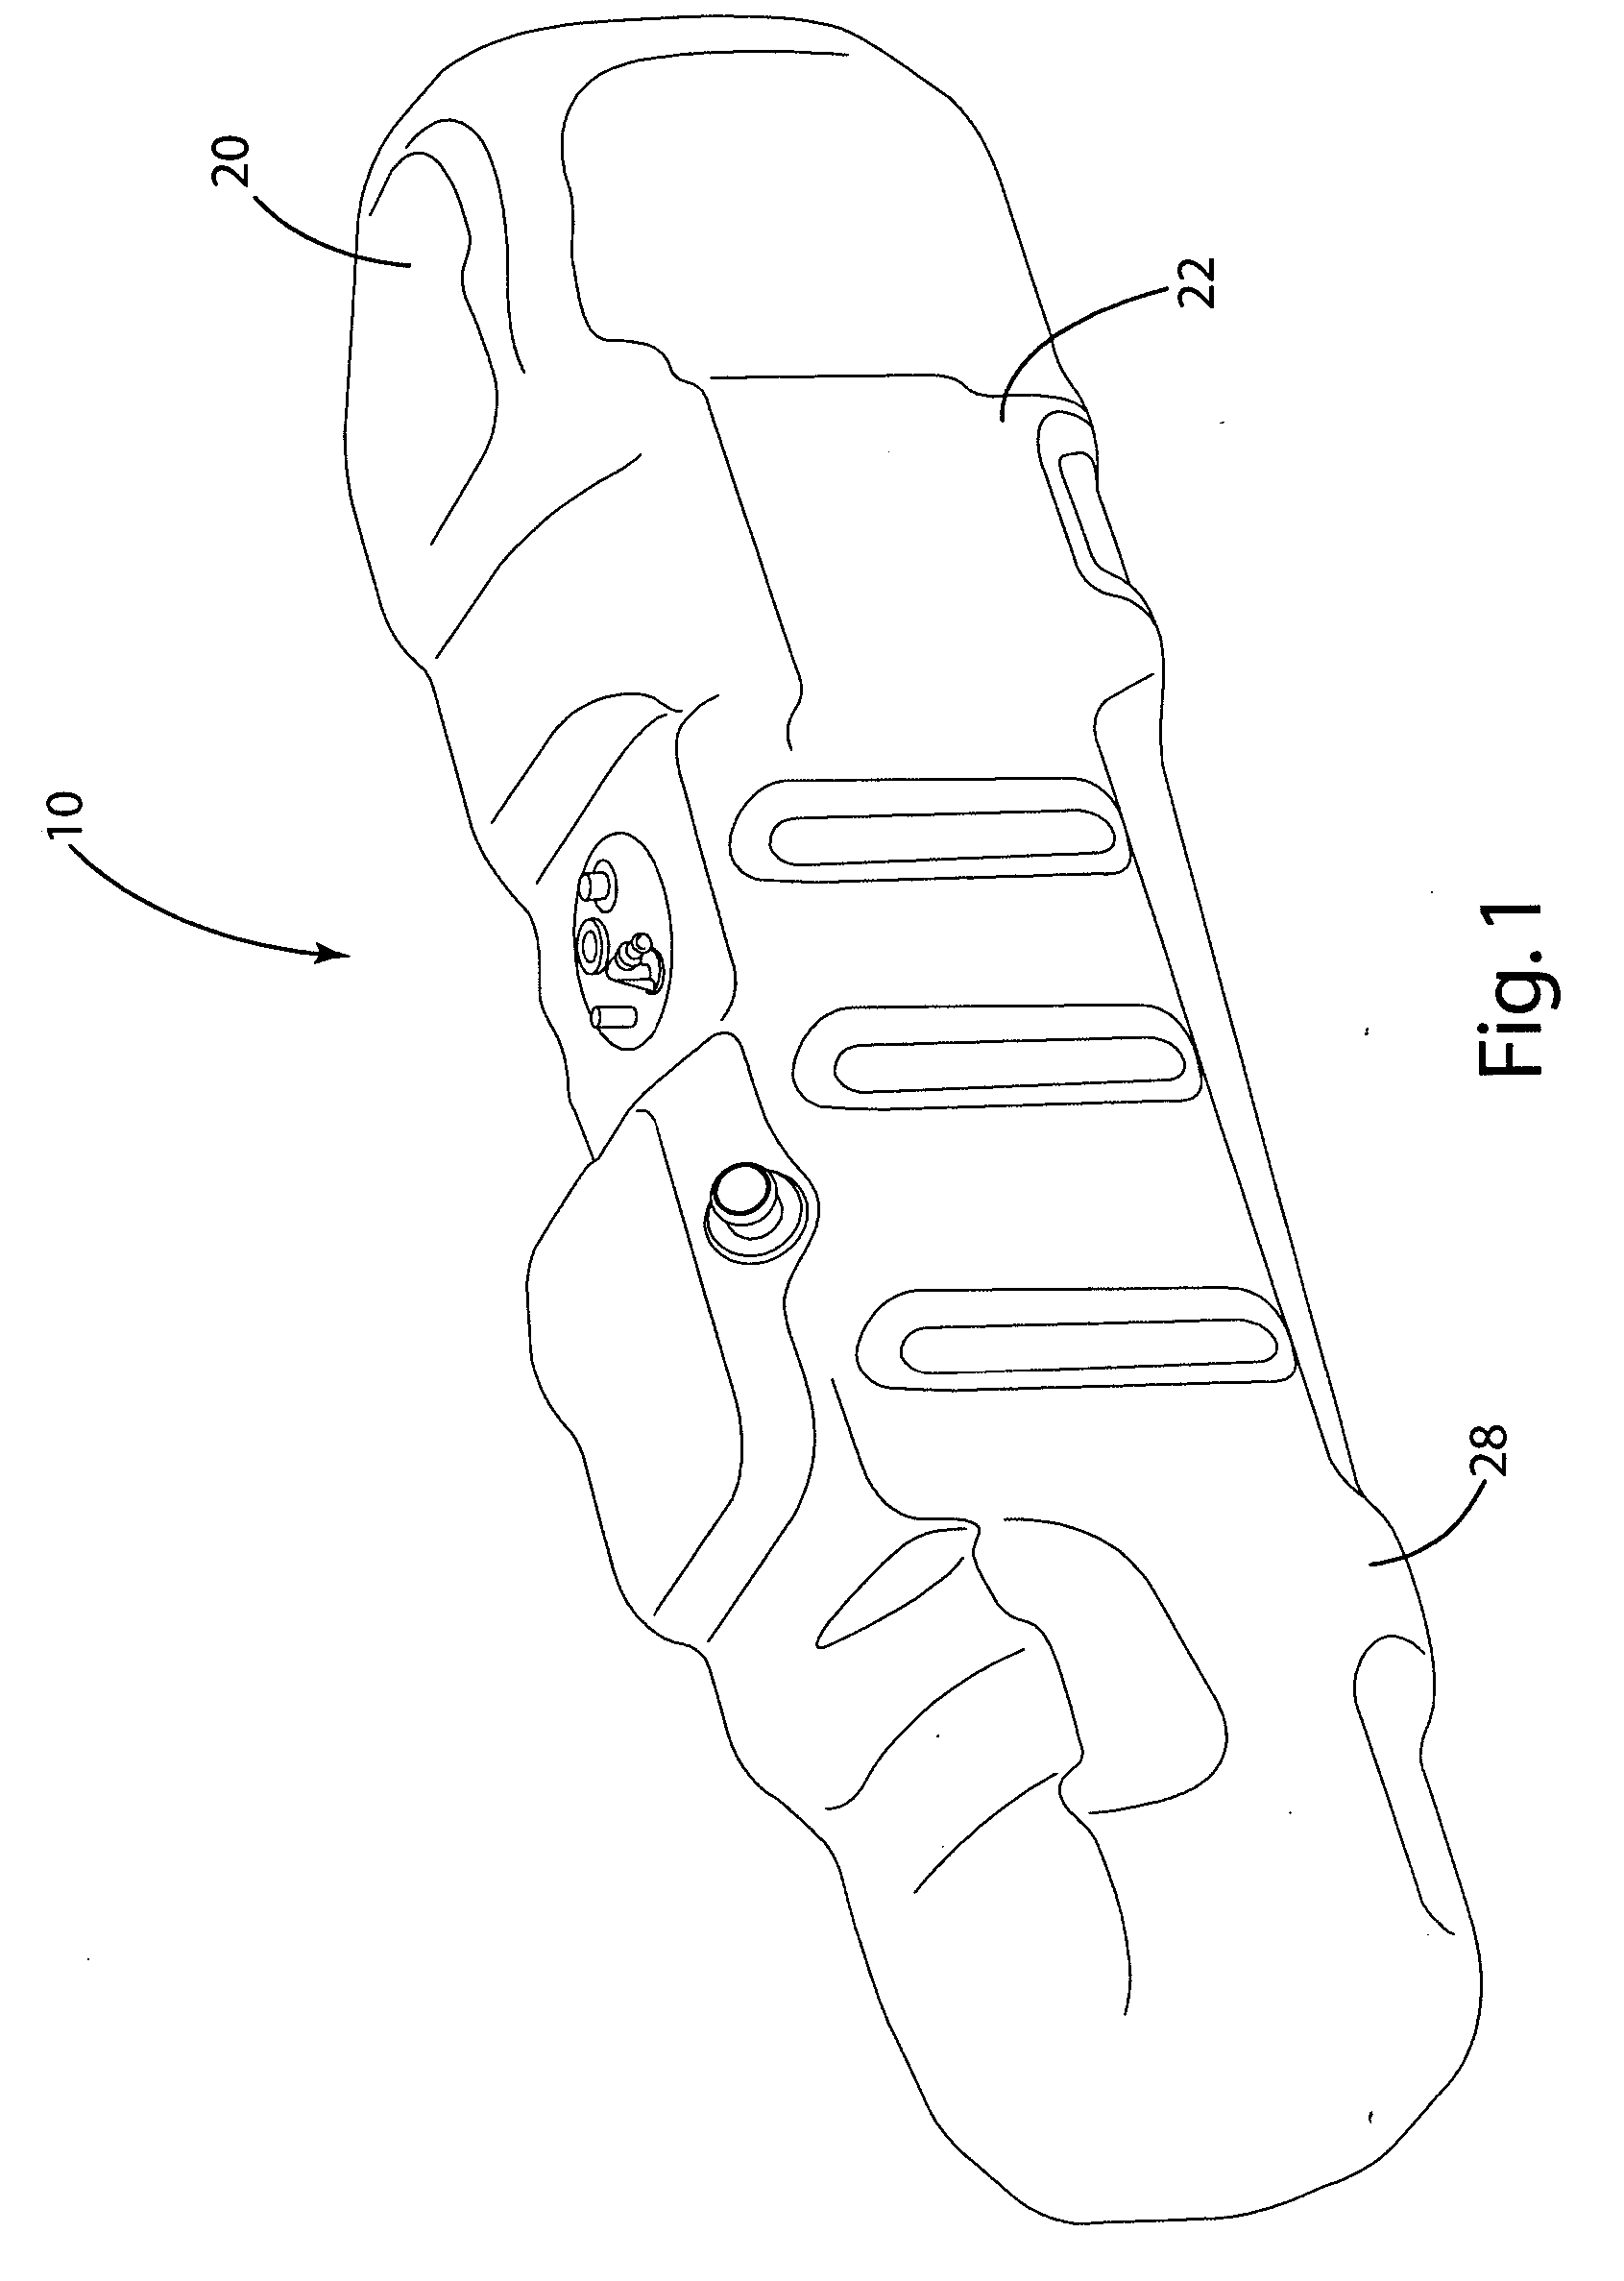 Fuel tank assembly and method of assembly